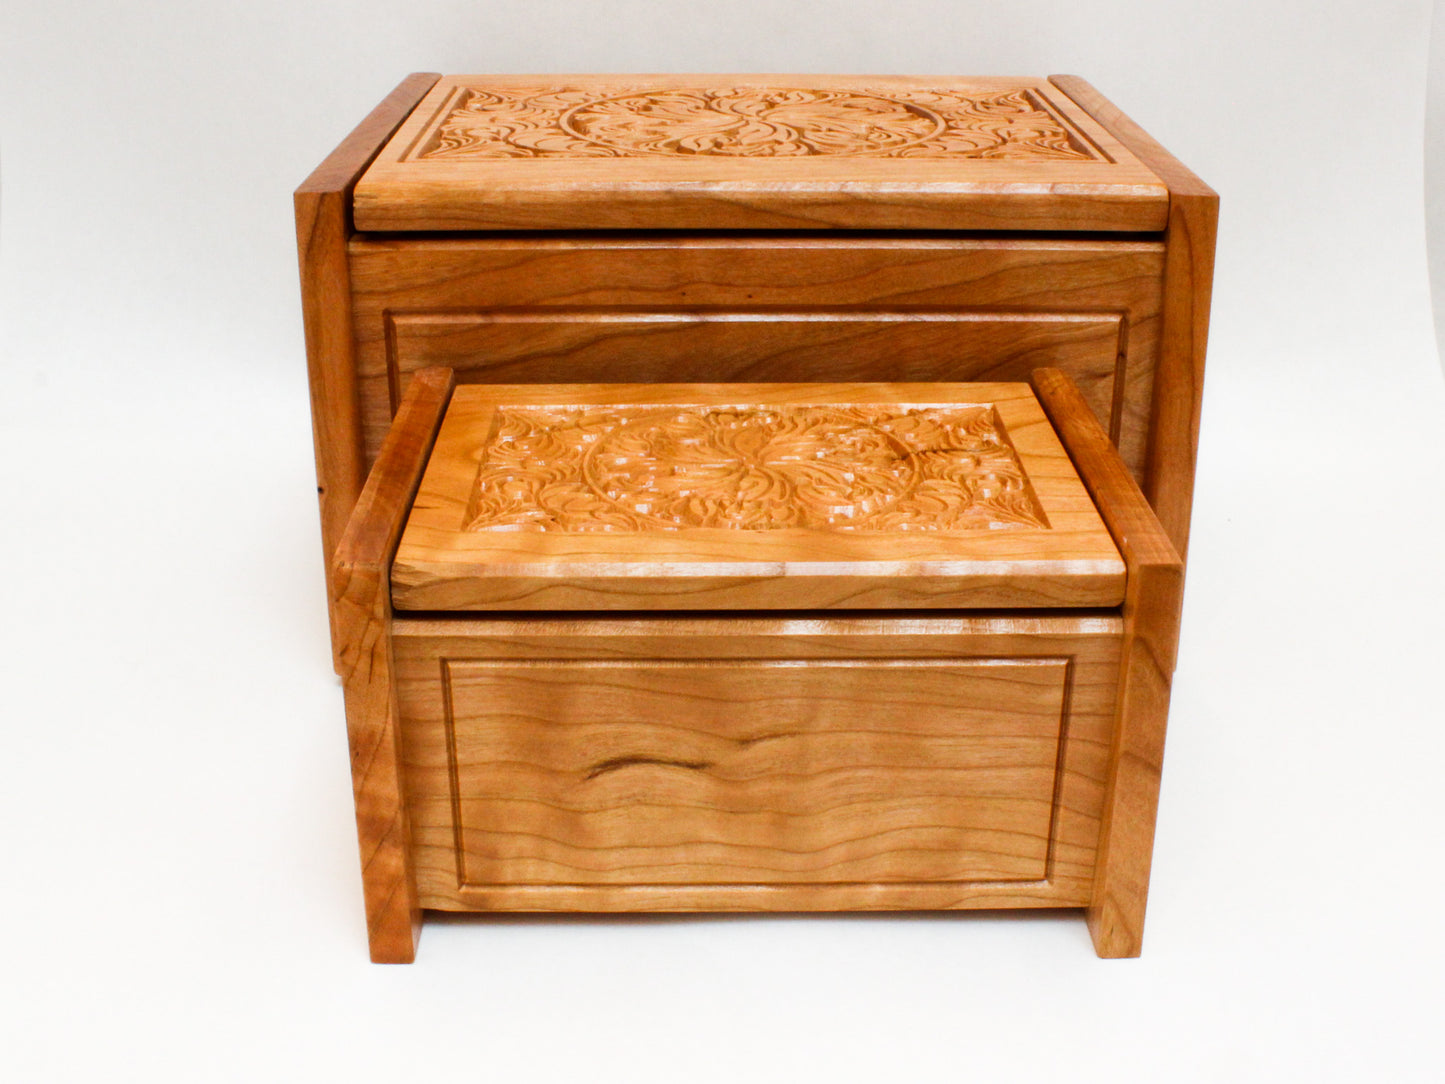 Large and small keepsake boxes shown together for size comparison: both made of beautiful cherry wood and engraved with floral design on top